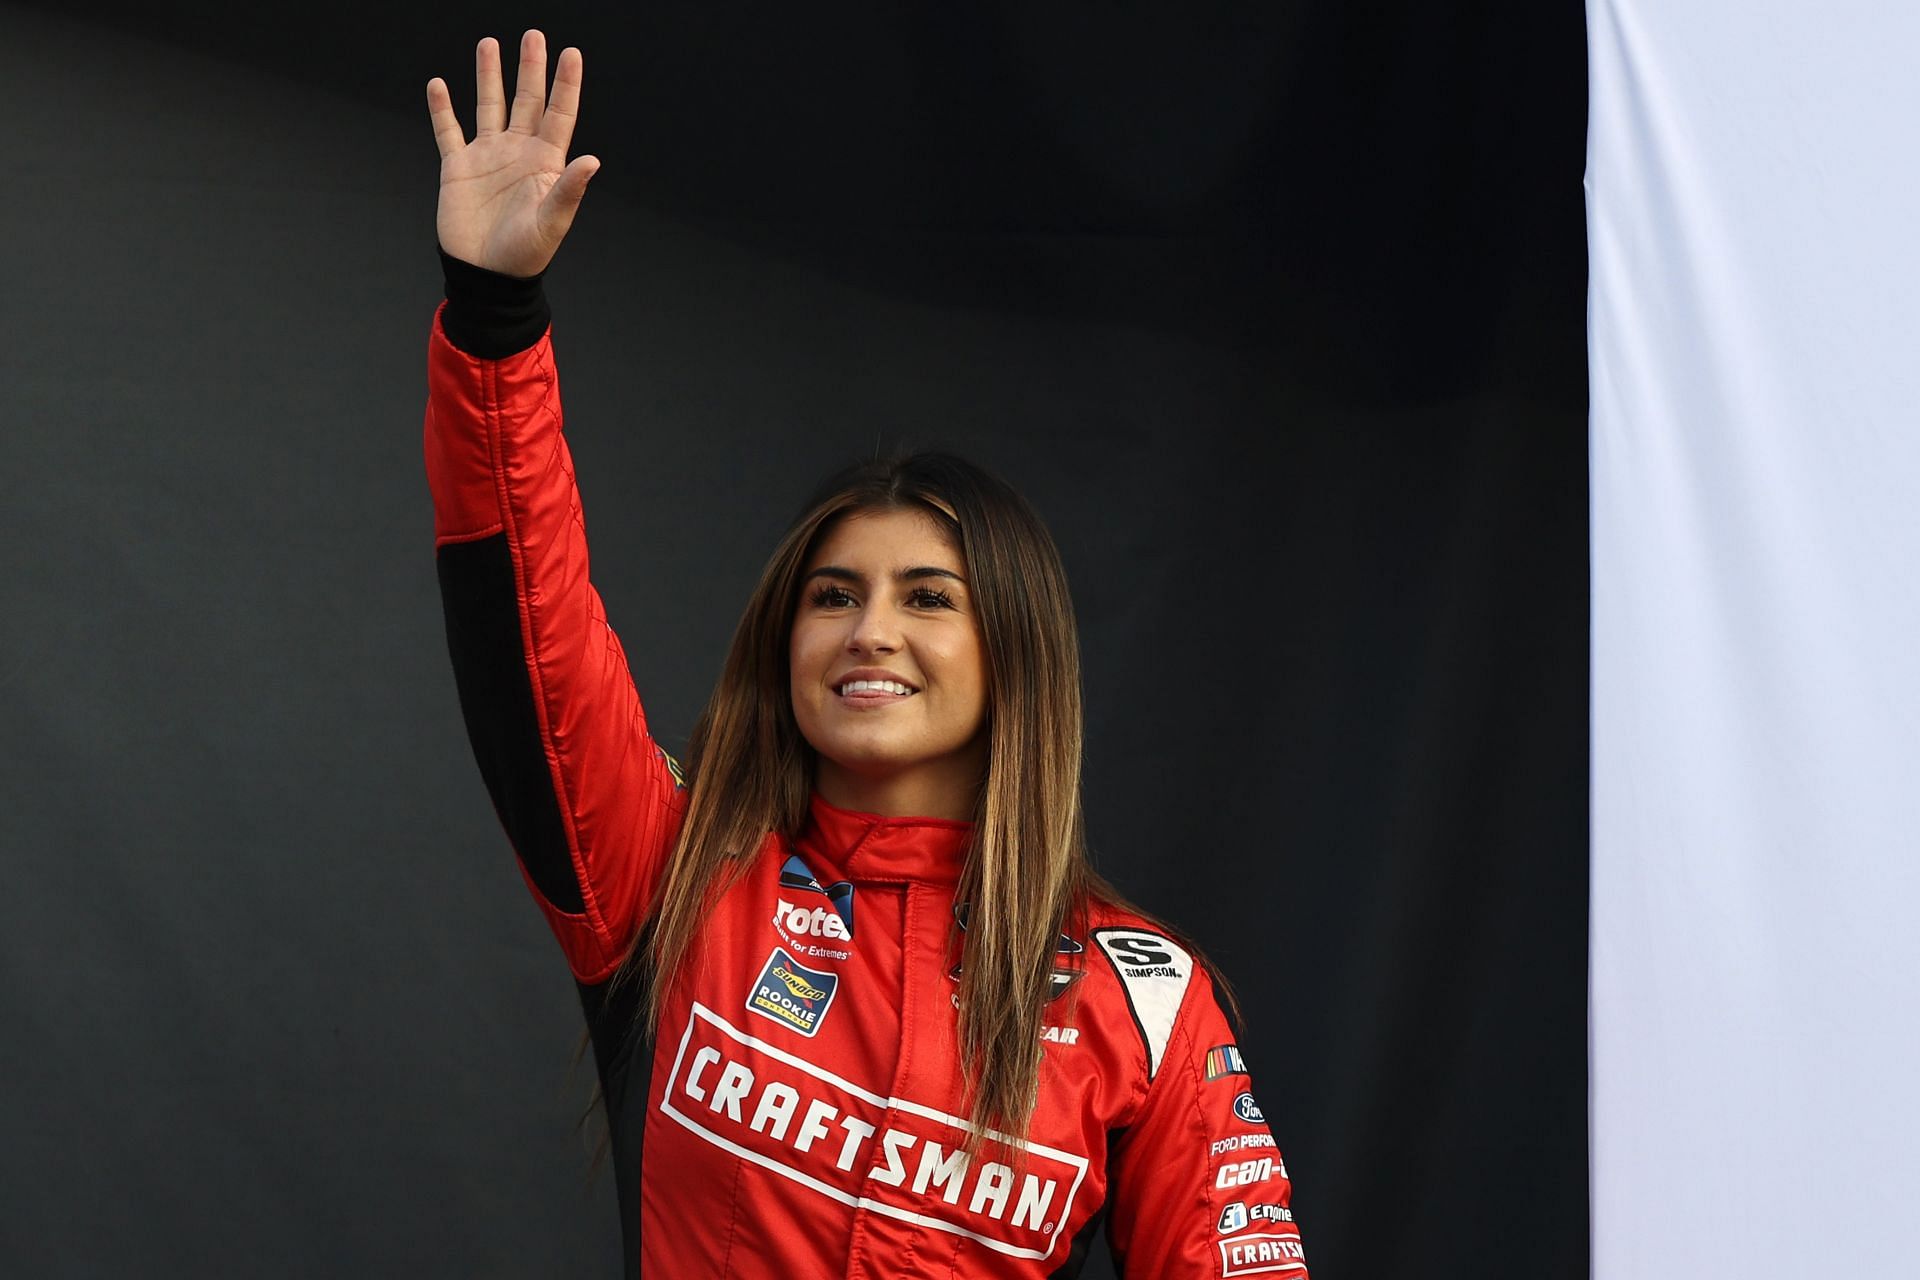 Hailie Deegan waves to fans before a race (Photo by Meg Oliphant/Getty Images)